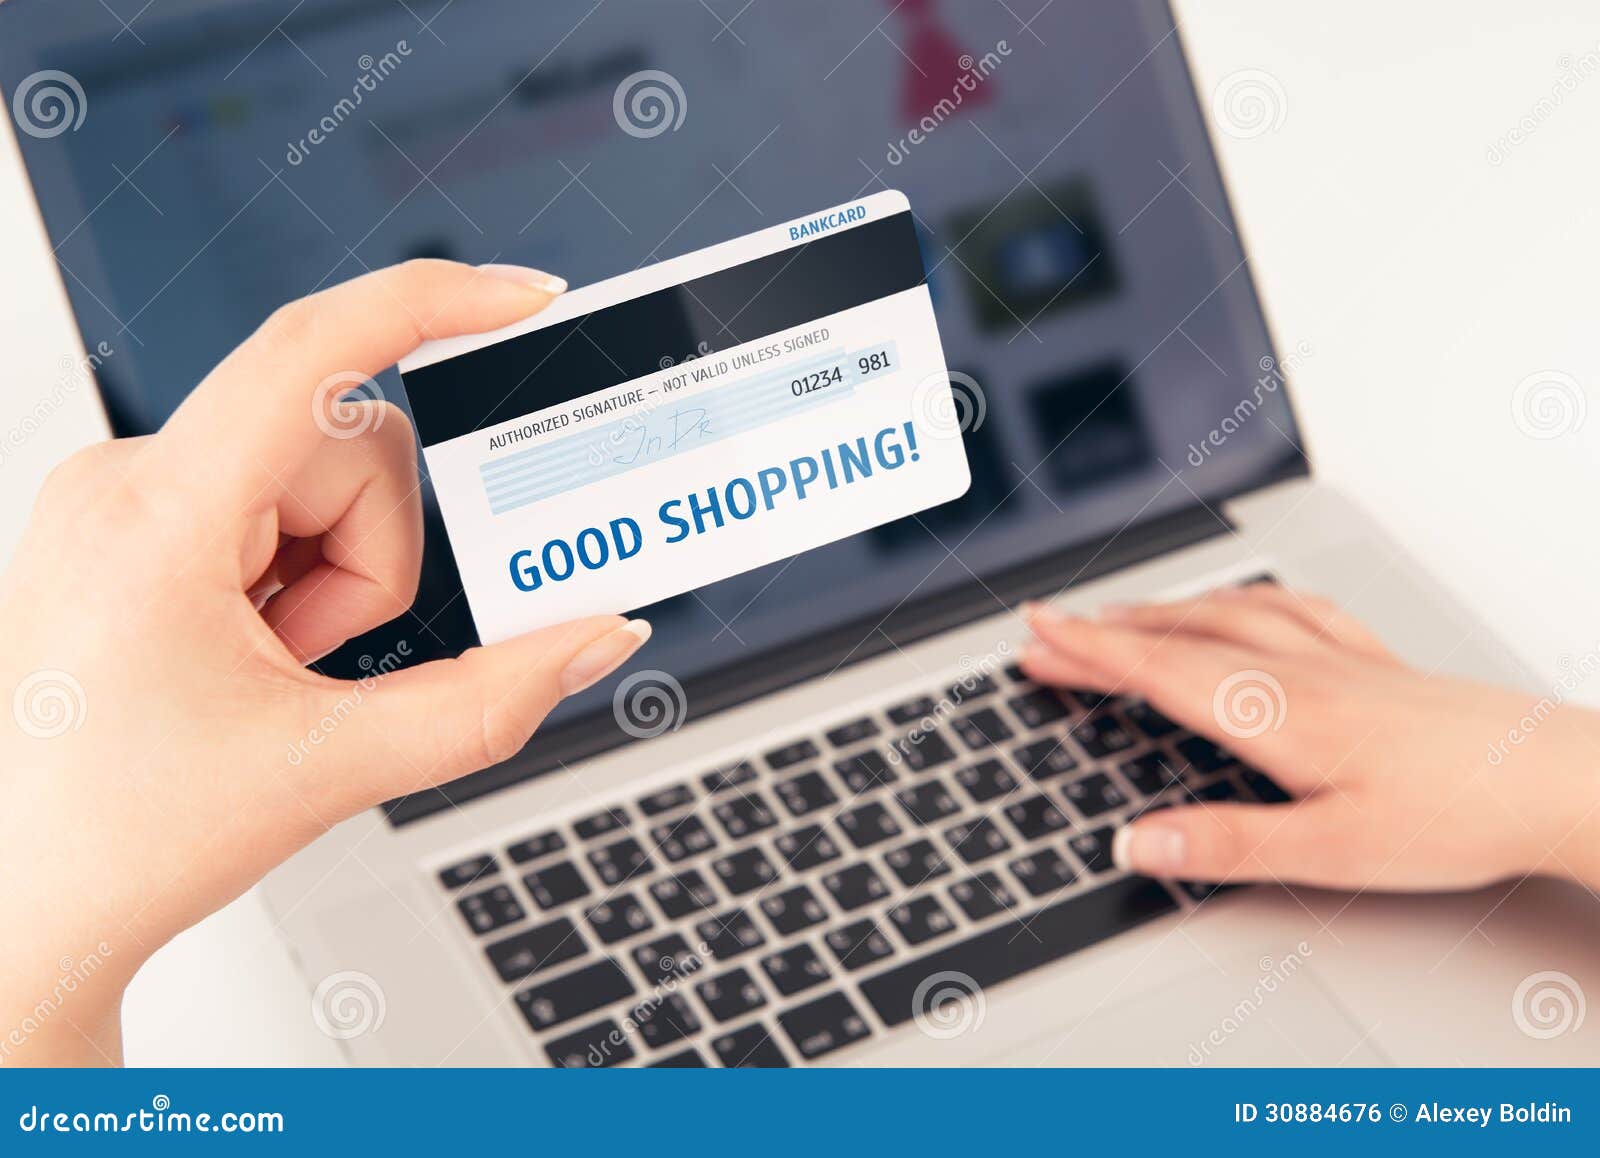 womans hand holding a bank card over a laptop.